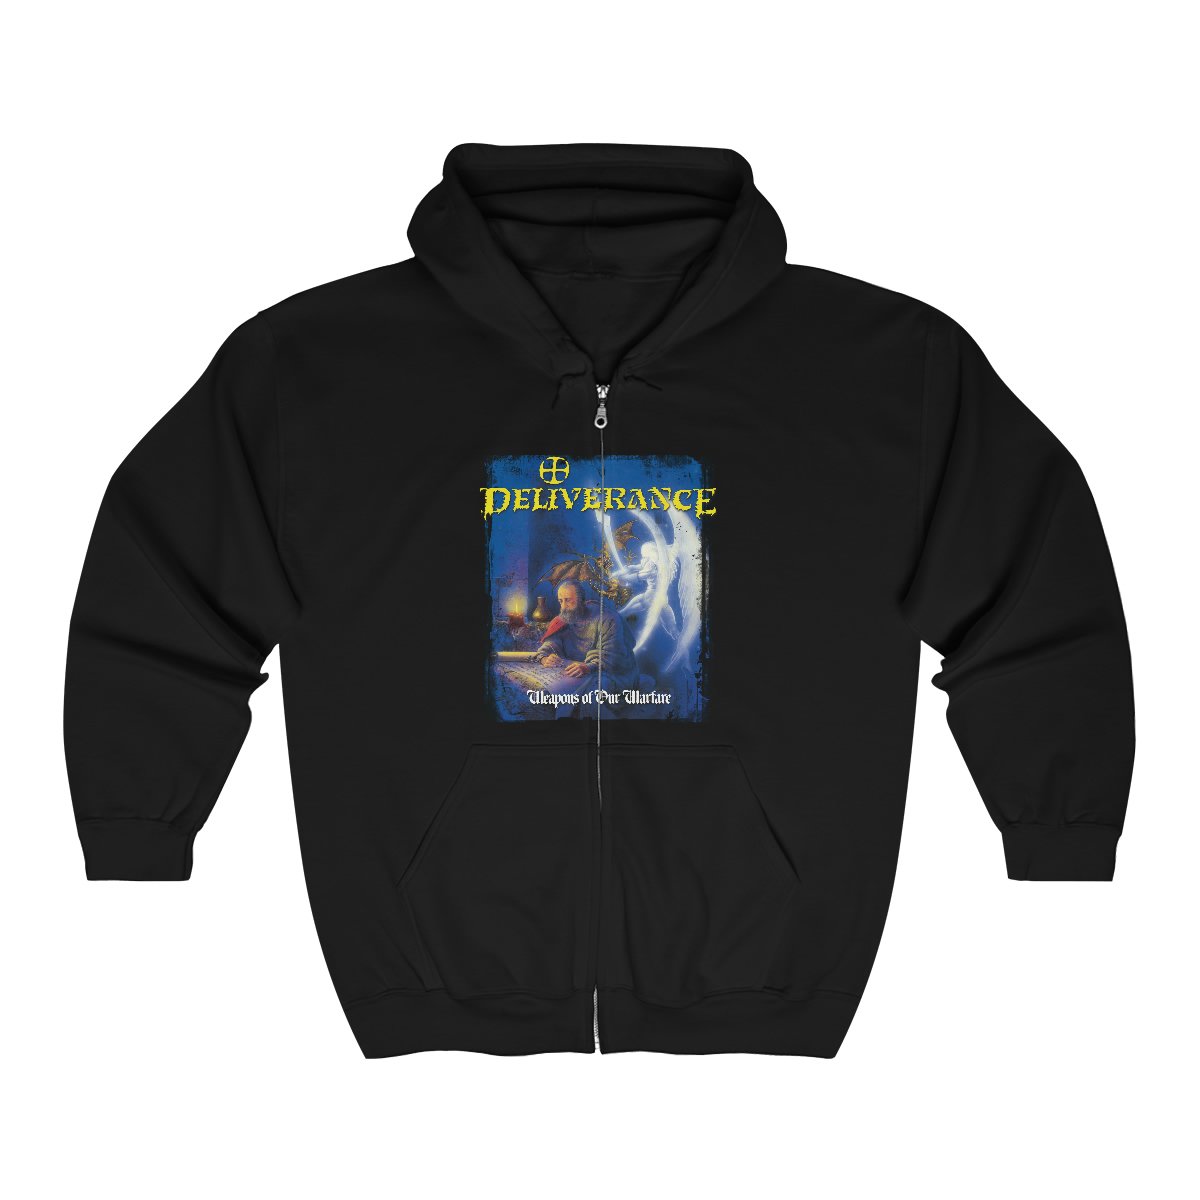 Deliverance – Weapons of Our Warfare Full Zip Hooded Sweatshirt